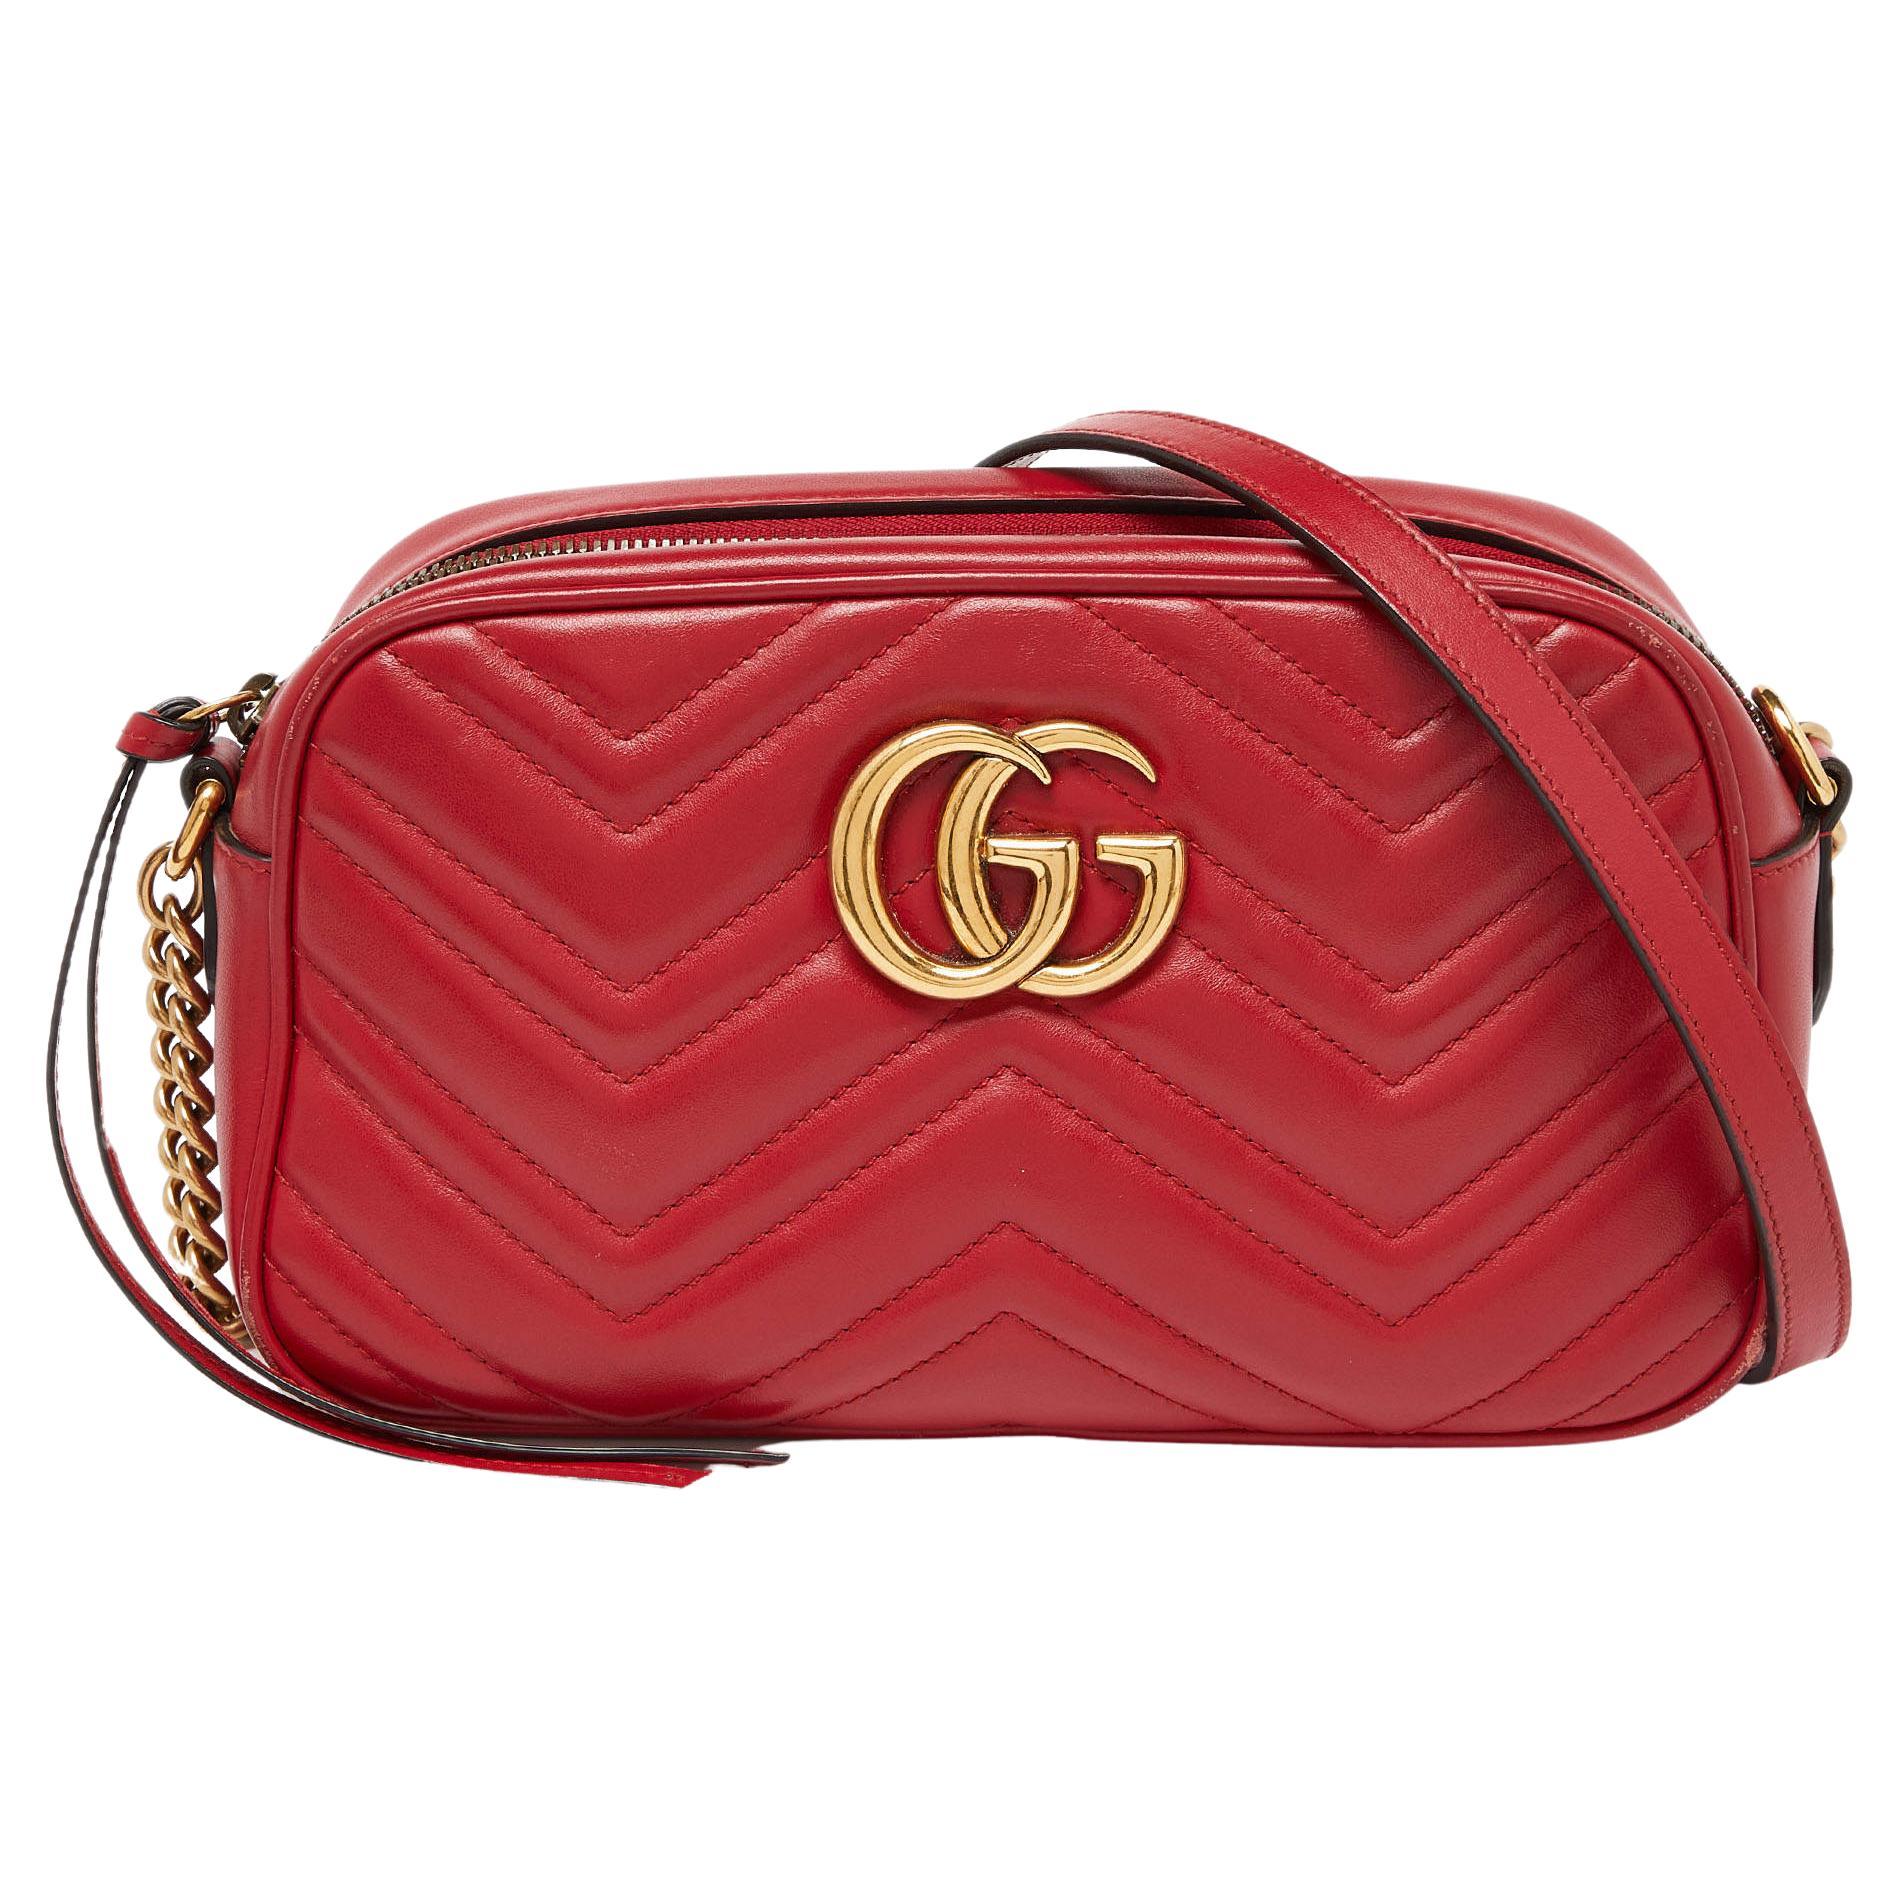 Gucci Red Matelassé Leather Small GG Marmont Shoulder Bag For Sale